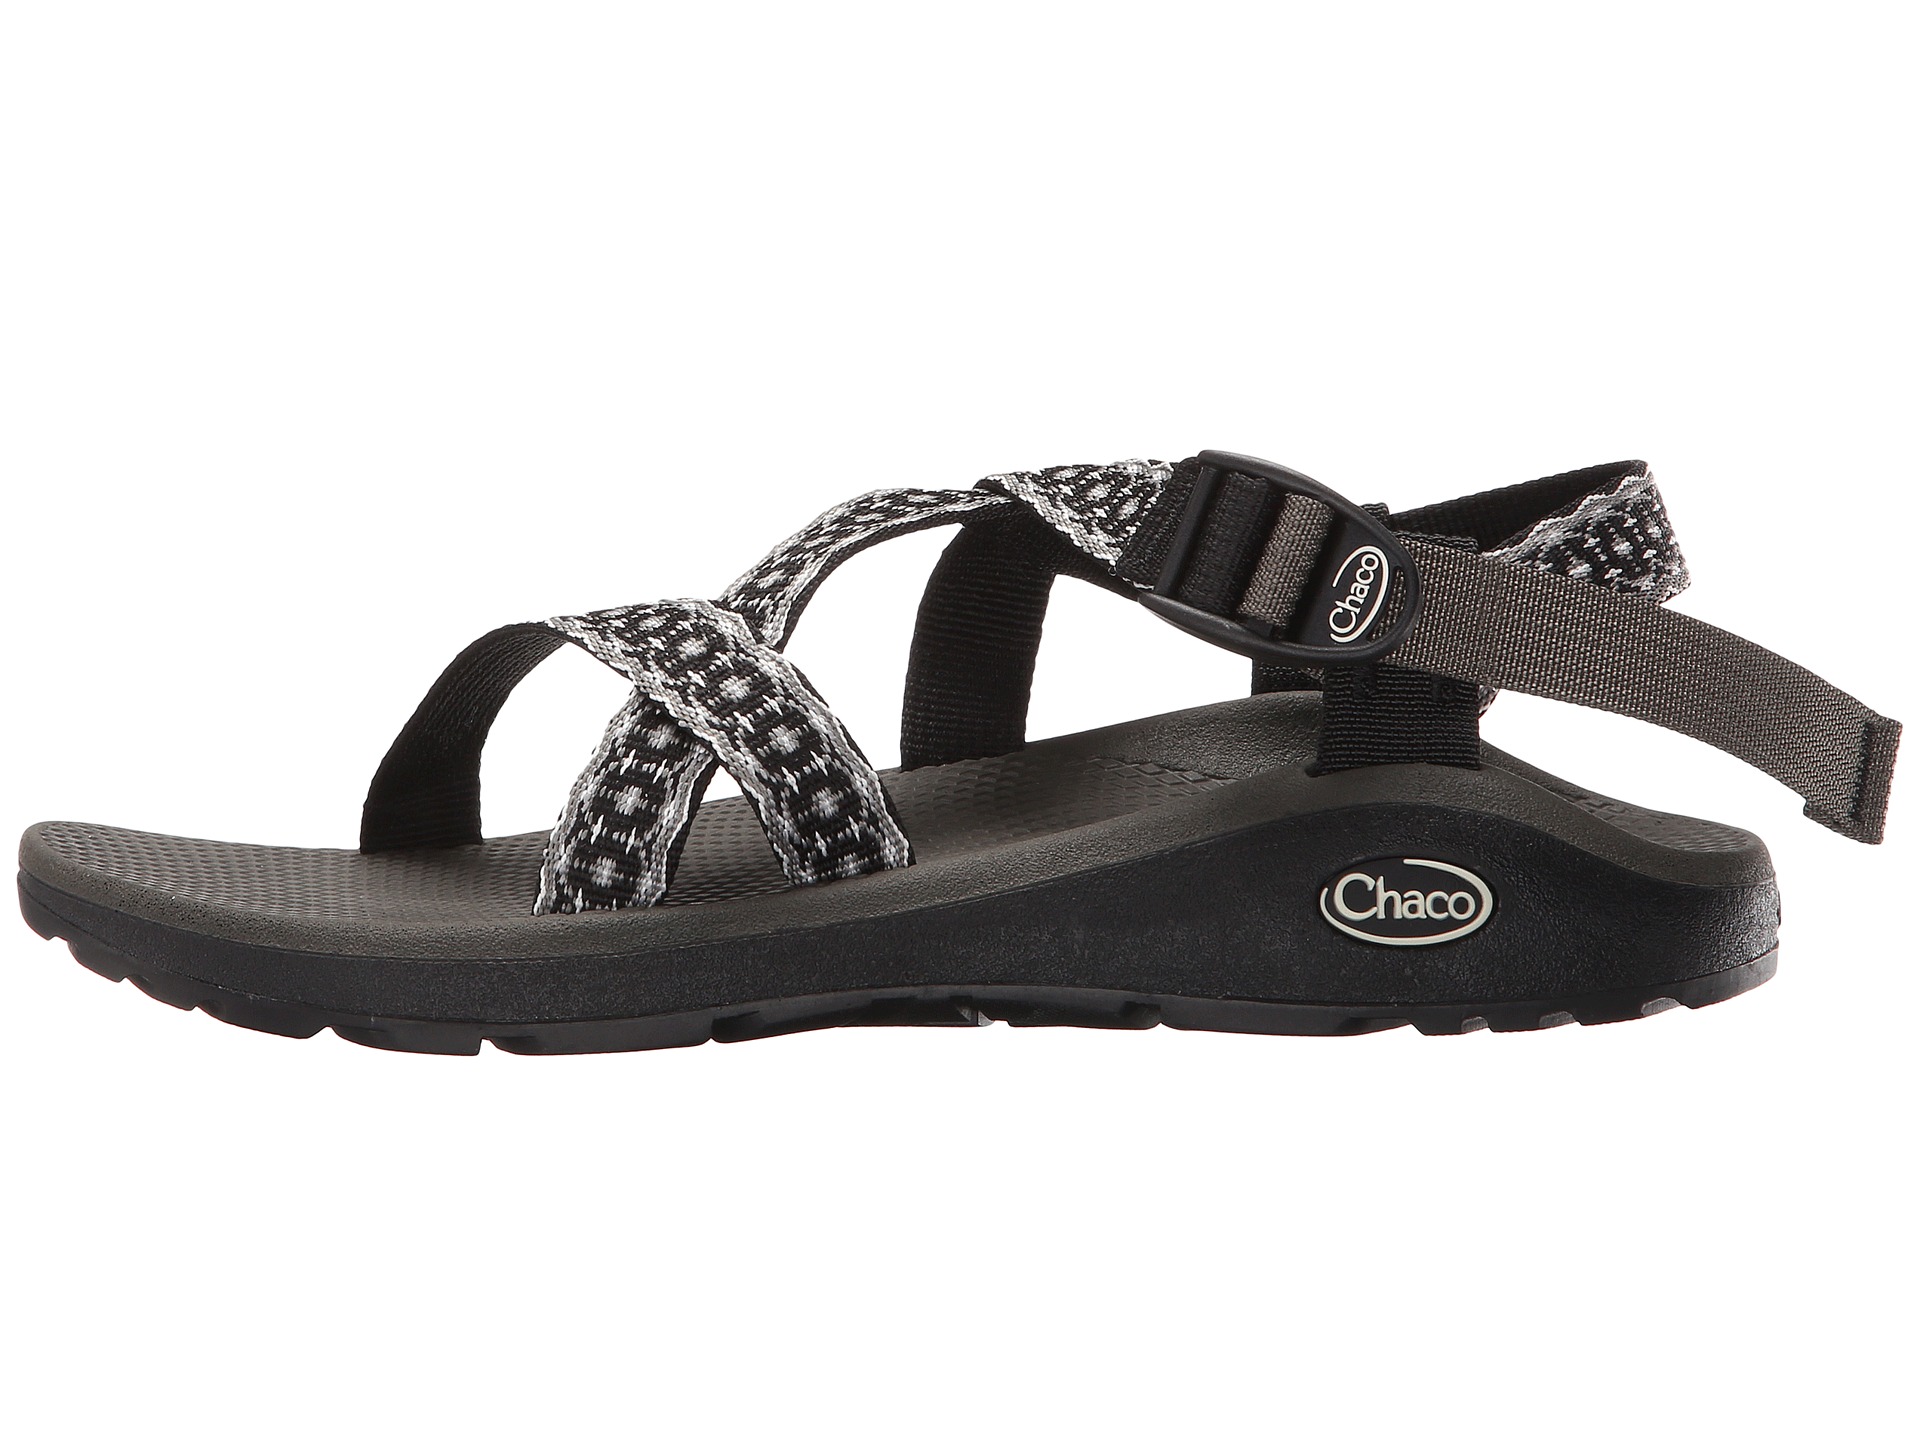 Chaco Z/Cloud at Zappos.com